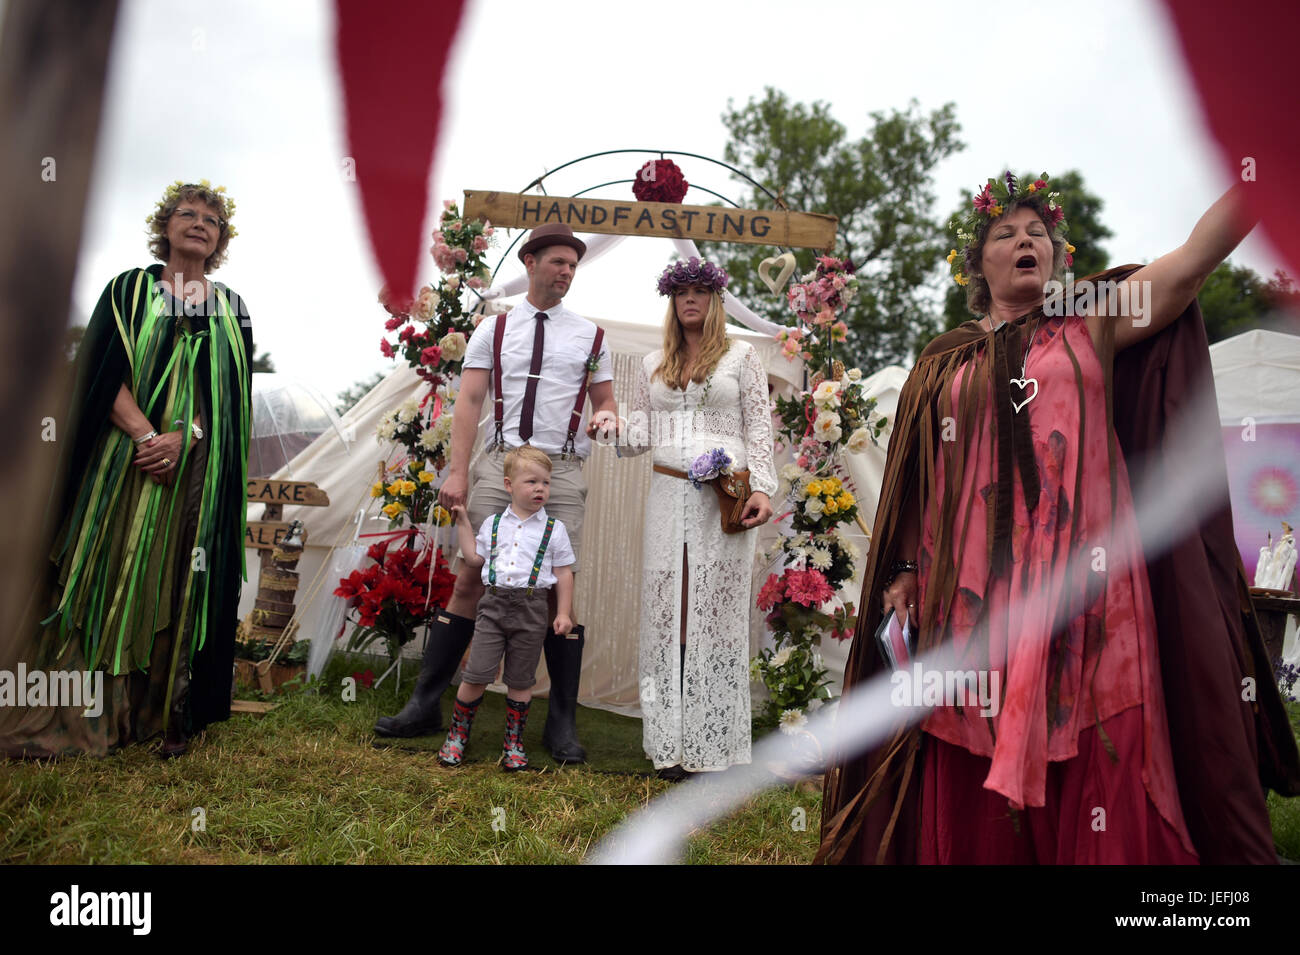 Fi Sexton, 32 and Peter Howe, 38, both from London accompanied by son Thomas Howe, 2 take part in a Handfasting wedding ceremony. The ceremony performed by Glenda proctor (brown) and Jane Tove (green) involved tying their hands together with bonds, Jumping a broom and Eating cake and drinking ale together at Glastonbury Festival, at Worthy Farm in Somerset. Stock Photo